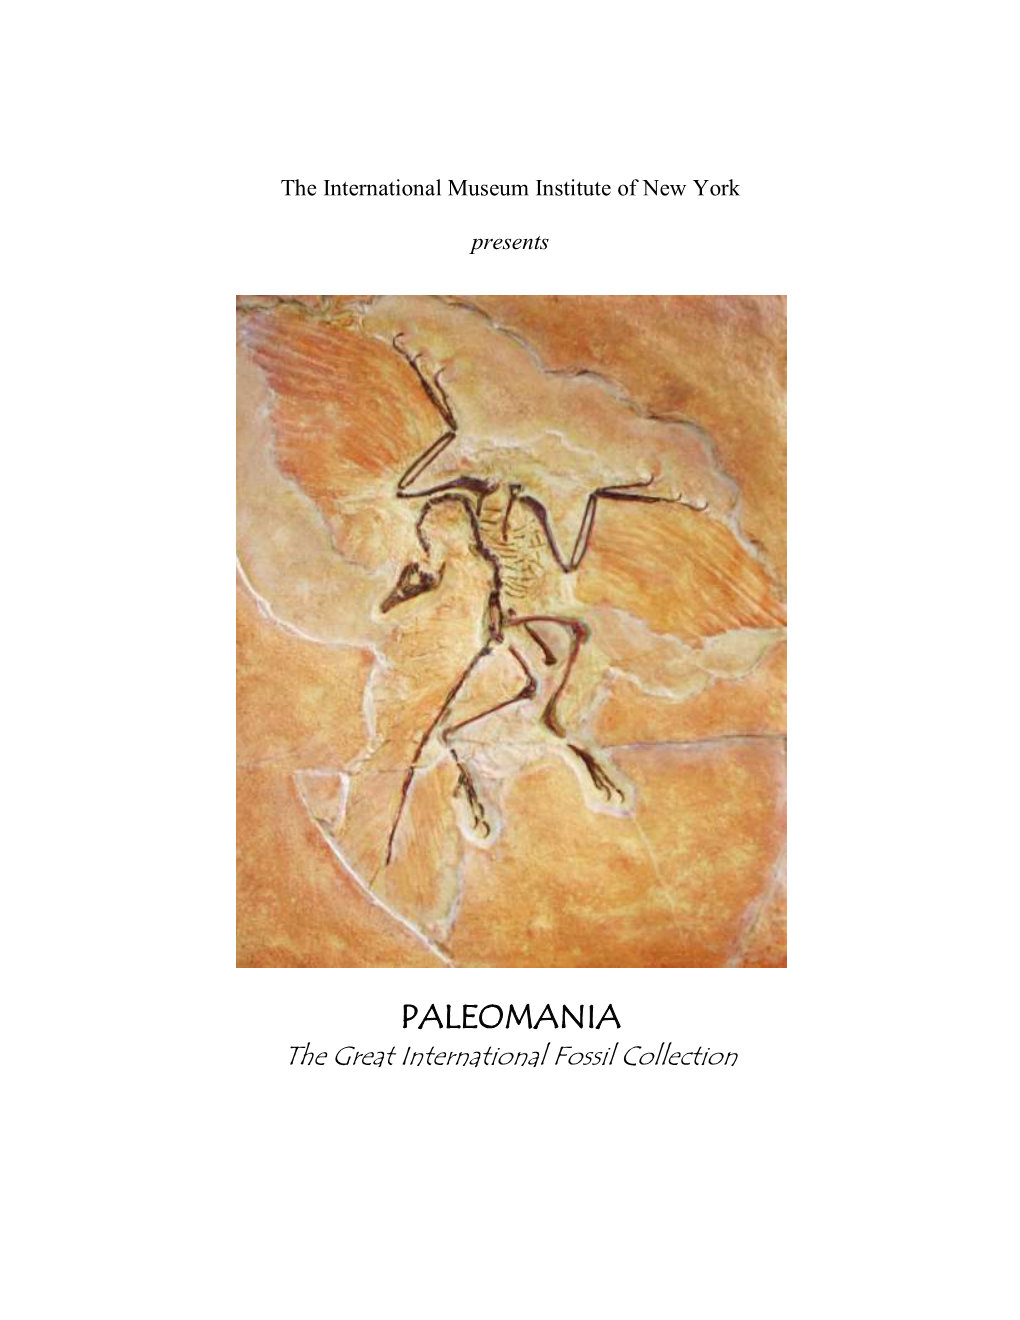 PALEOMANIA the Great International Fossil Collection